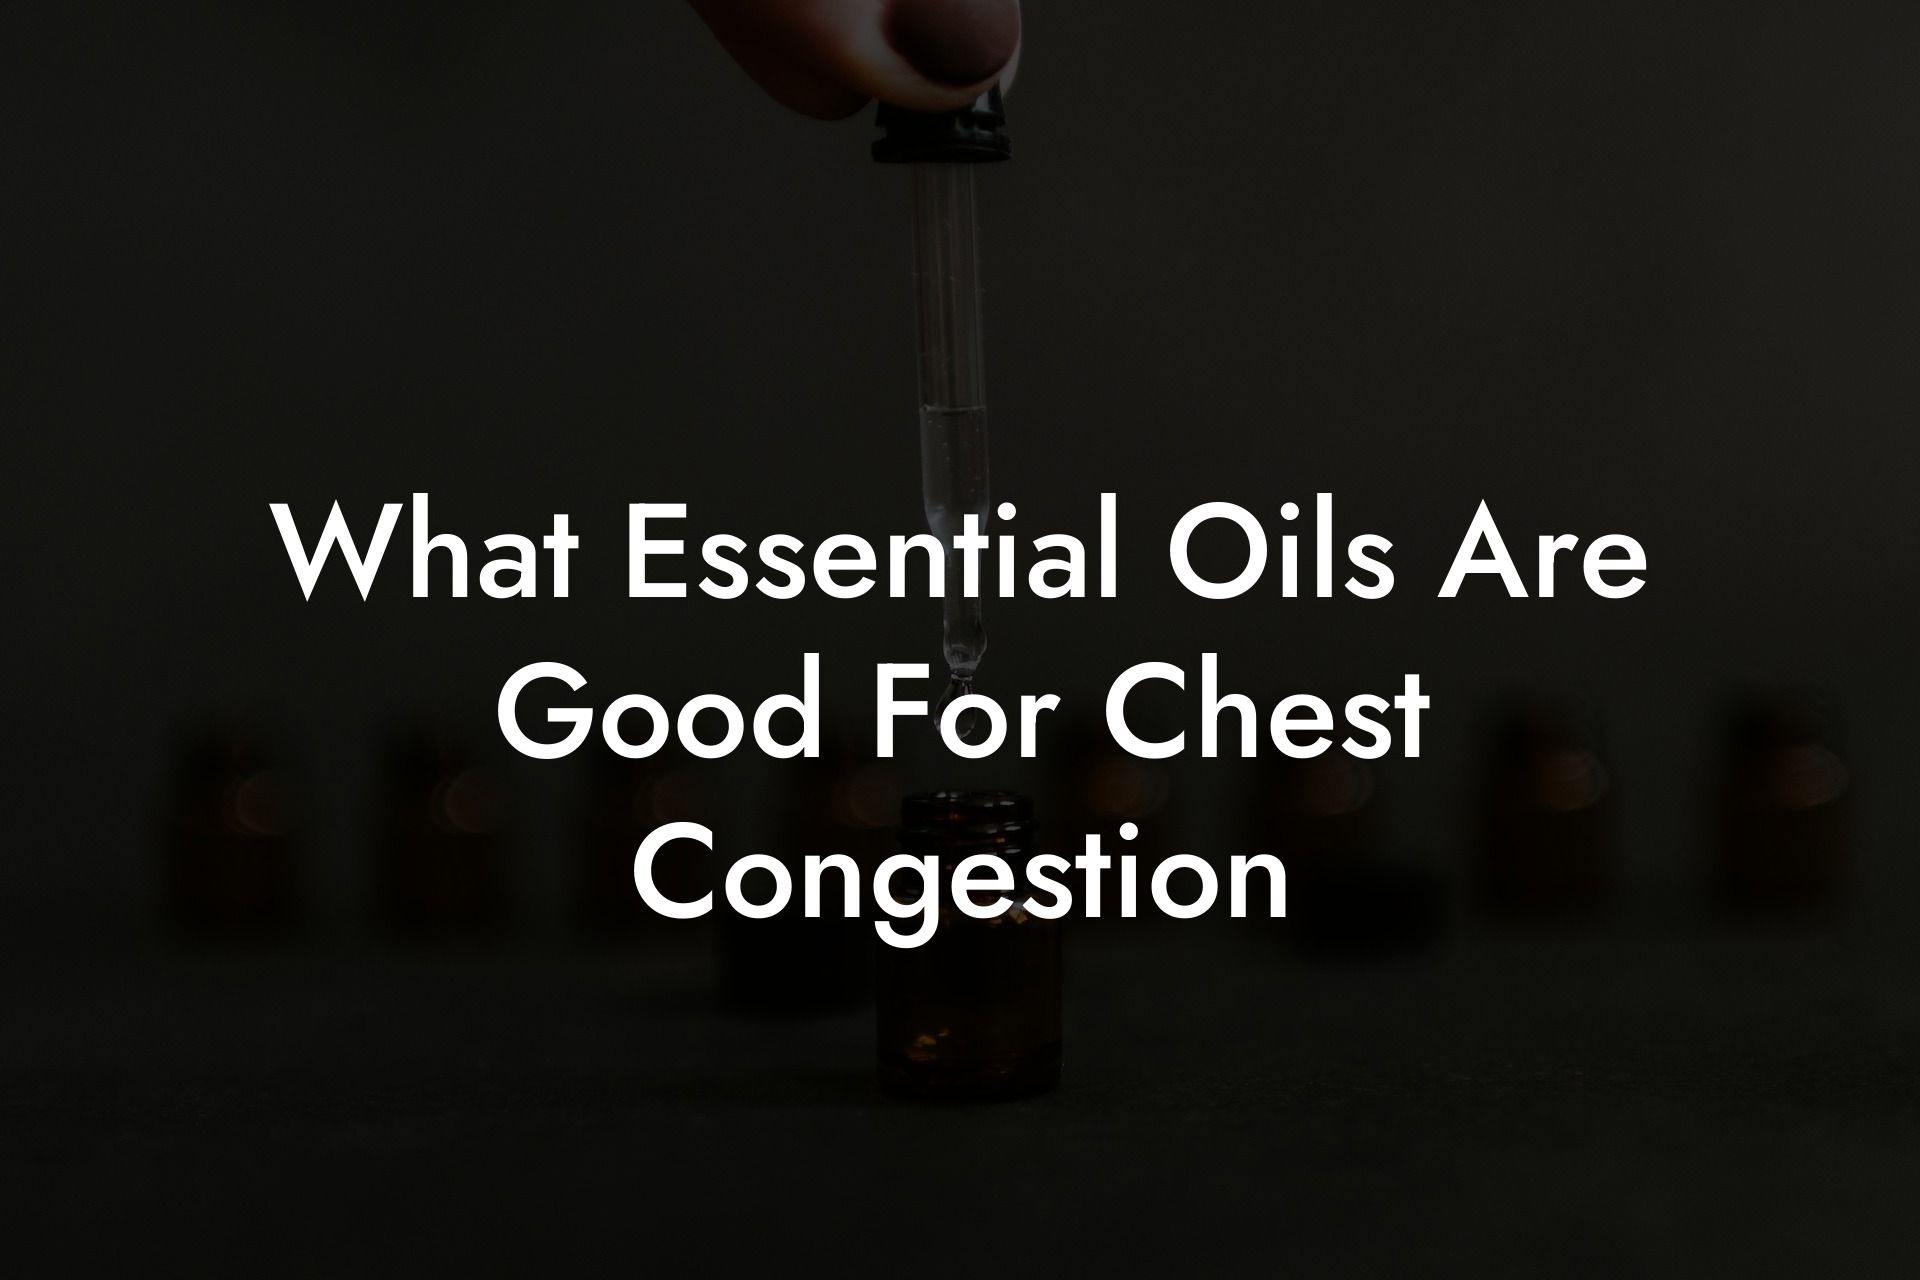 What Essential Oils Are Good For Chest Congestion